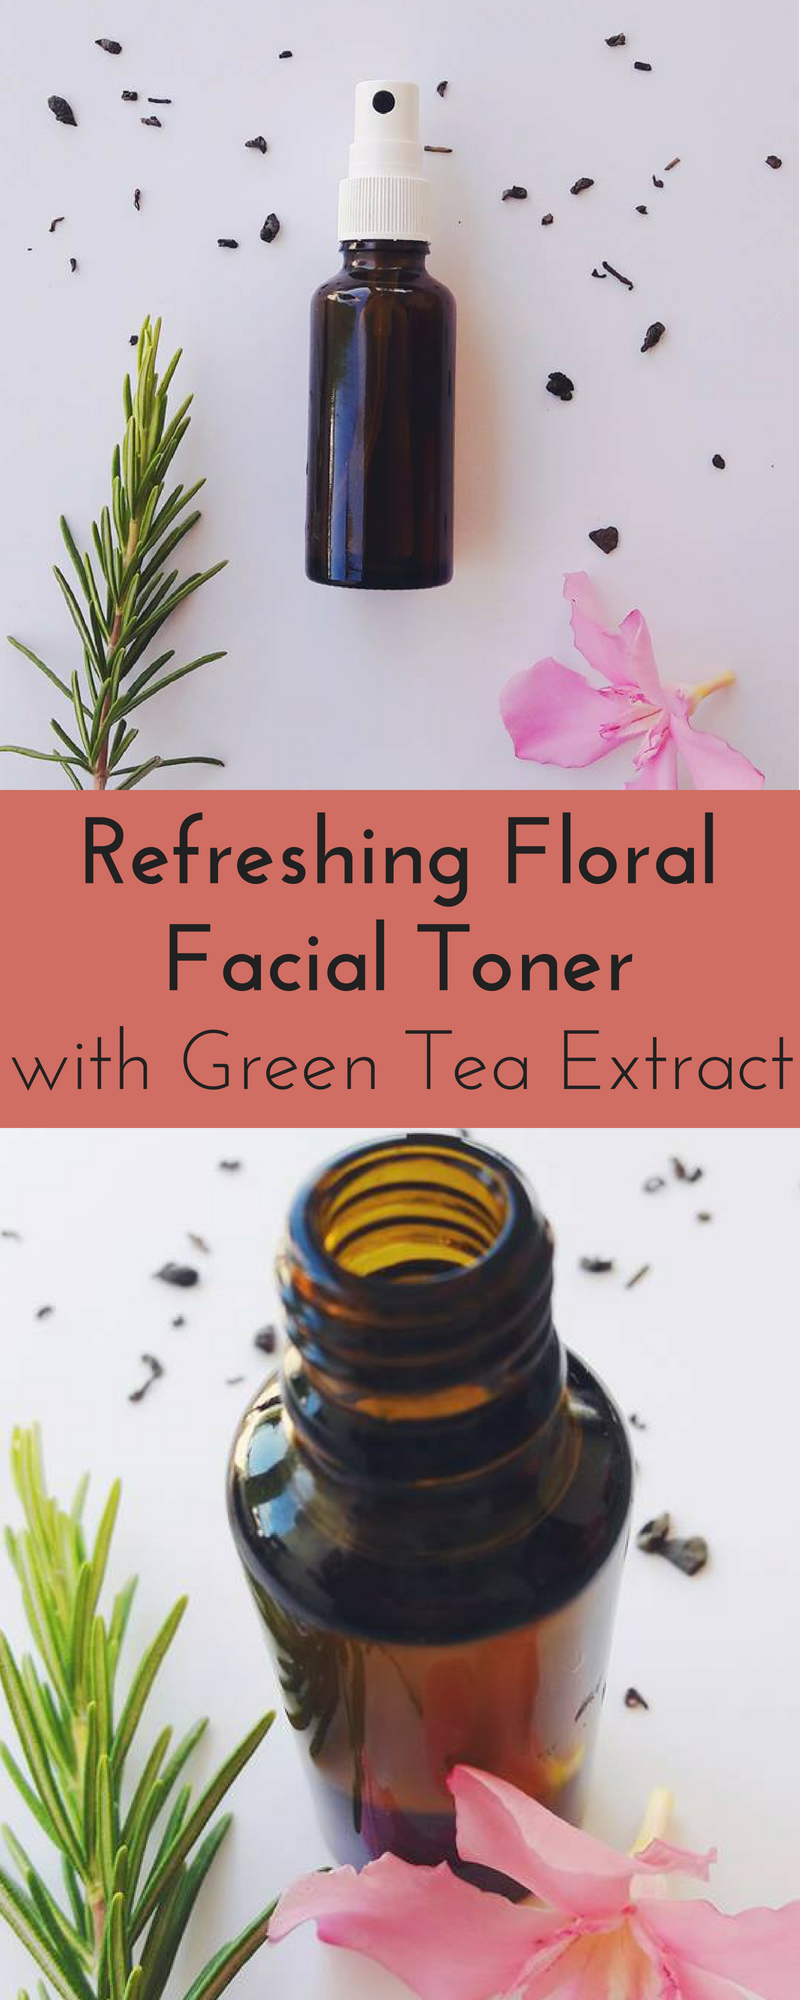 Refreshing Floral Facial Toner with Green Tea Extract